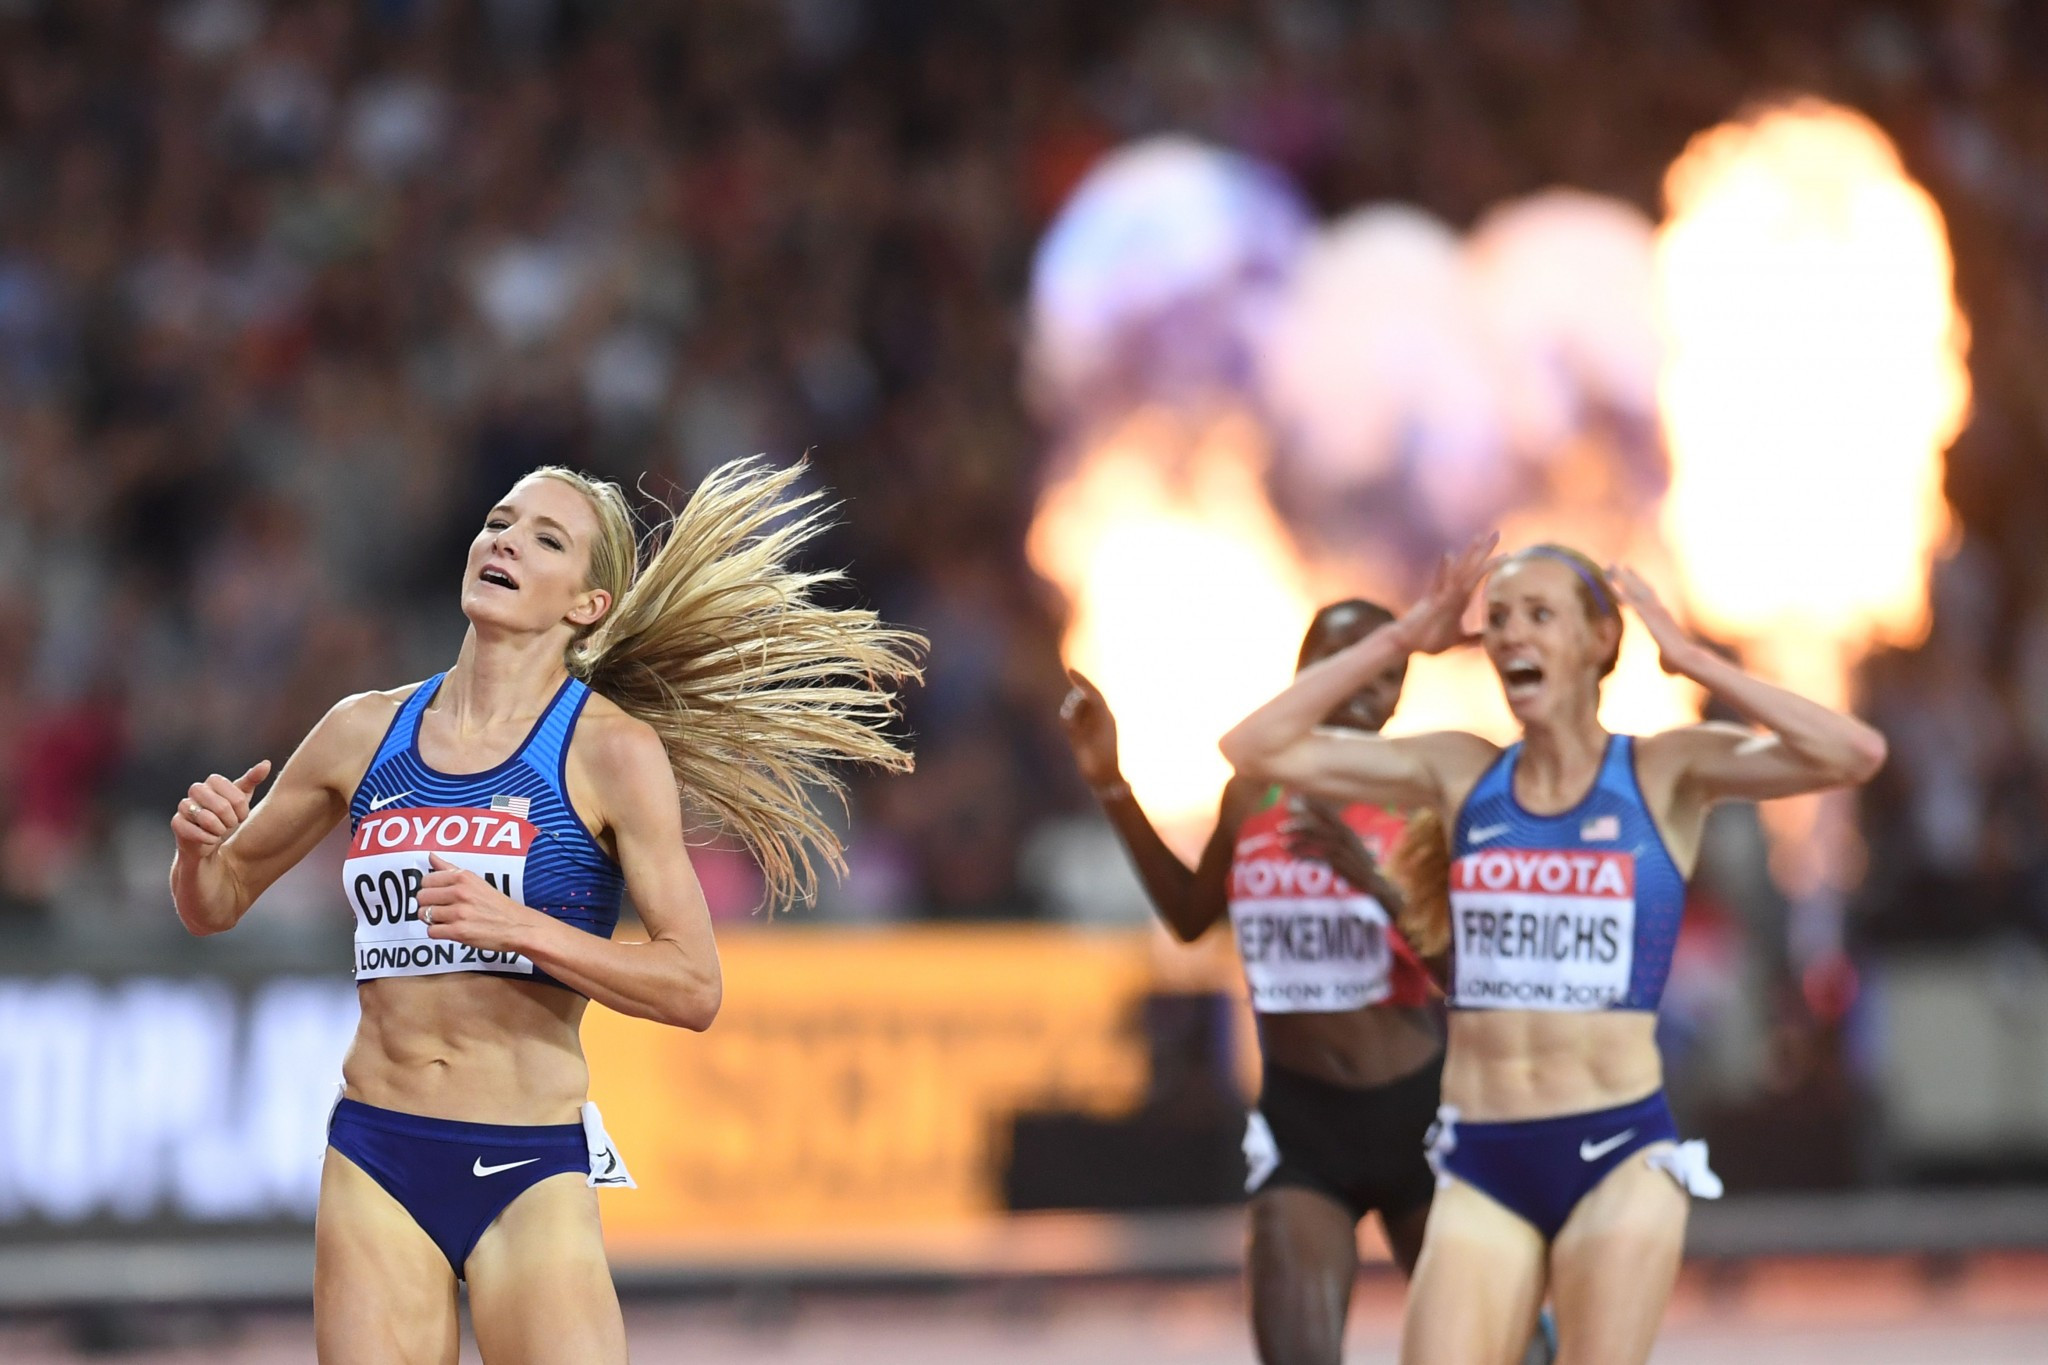 Emma Coburn led home a US 1-2 in the 3,000m steeplechase ©Getty Images